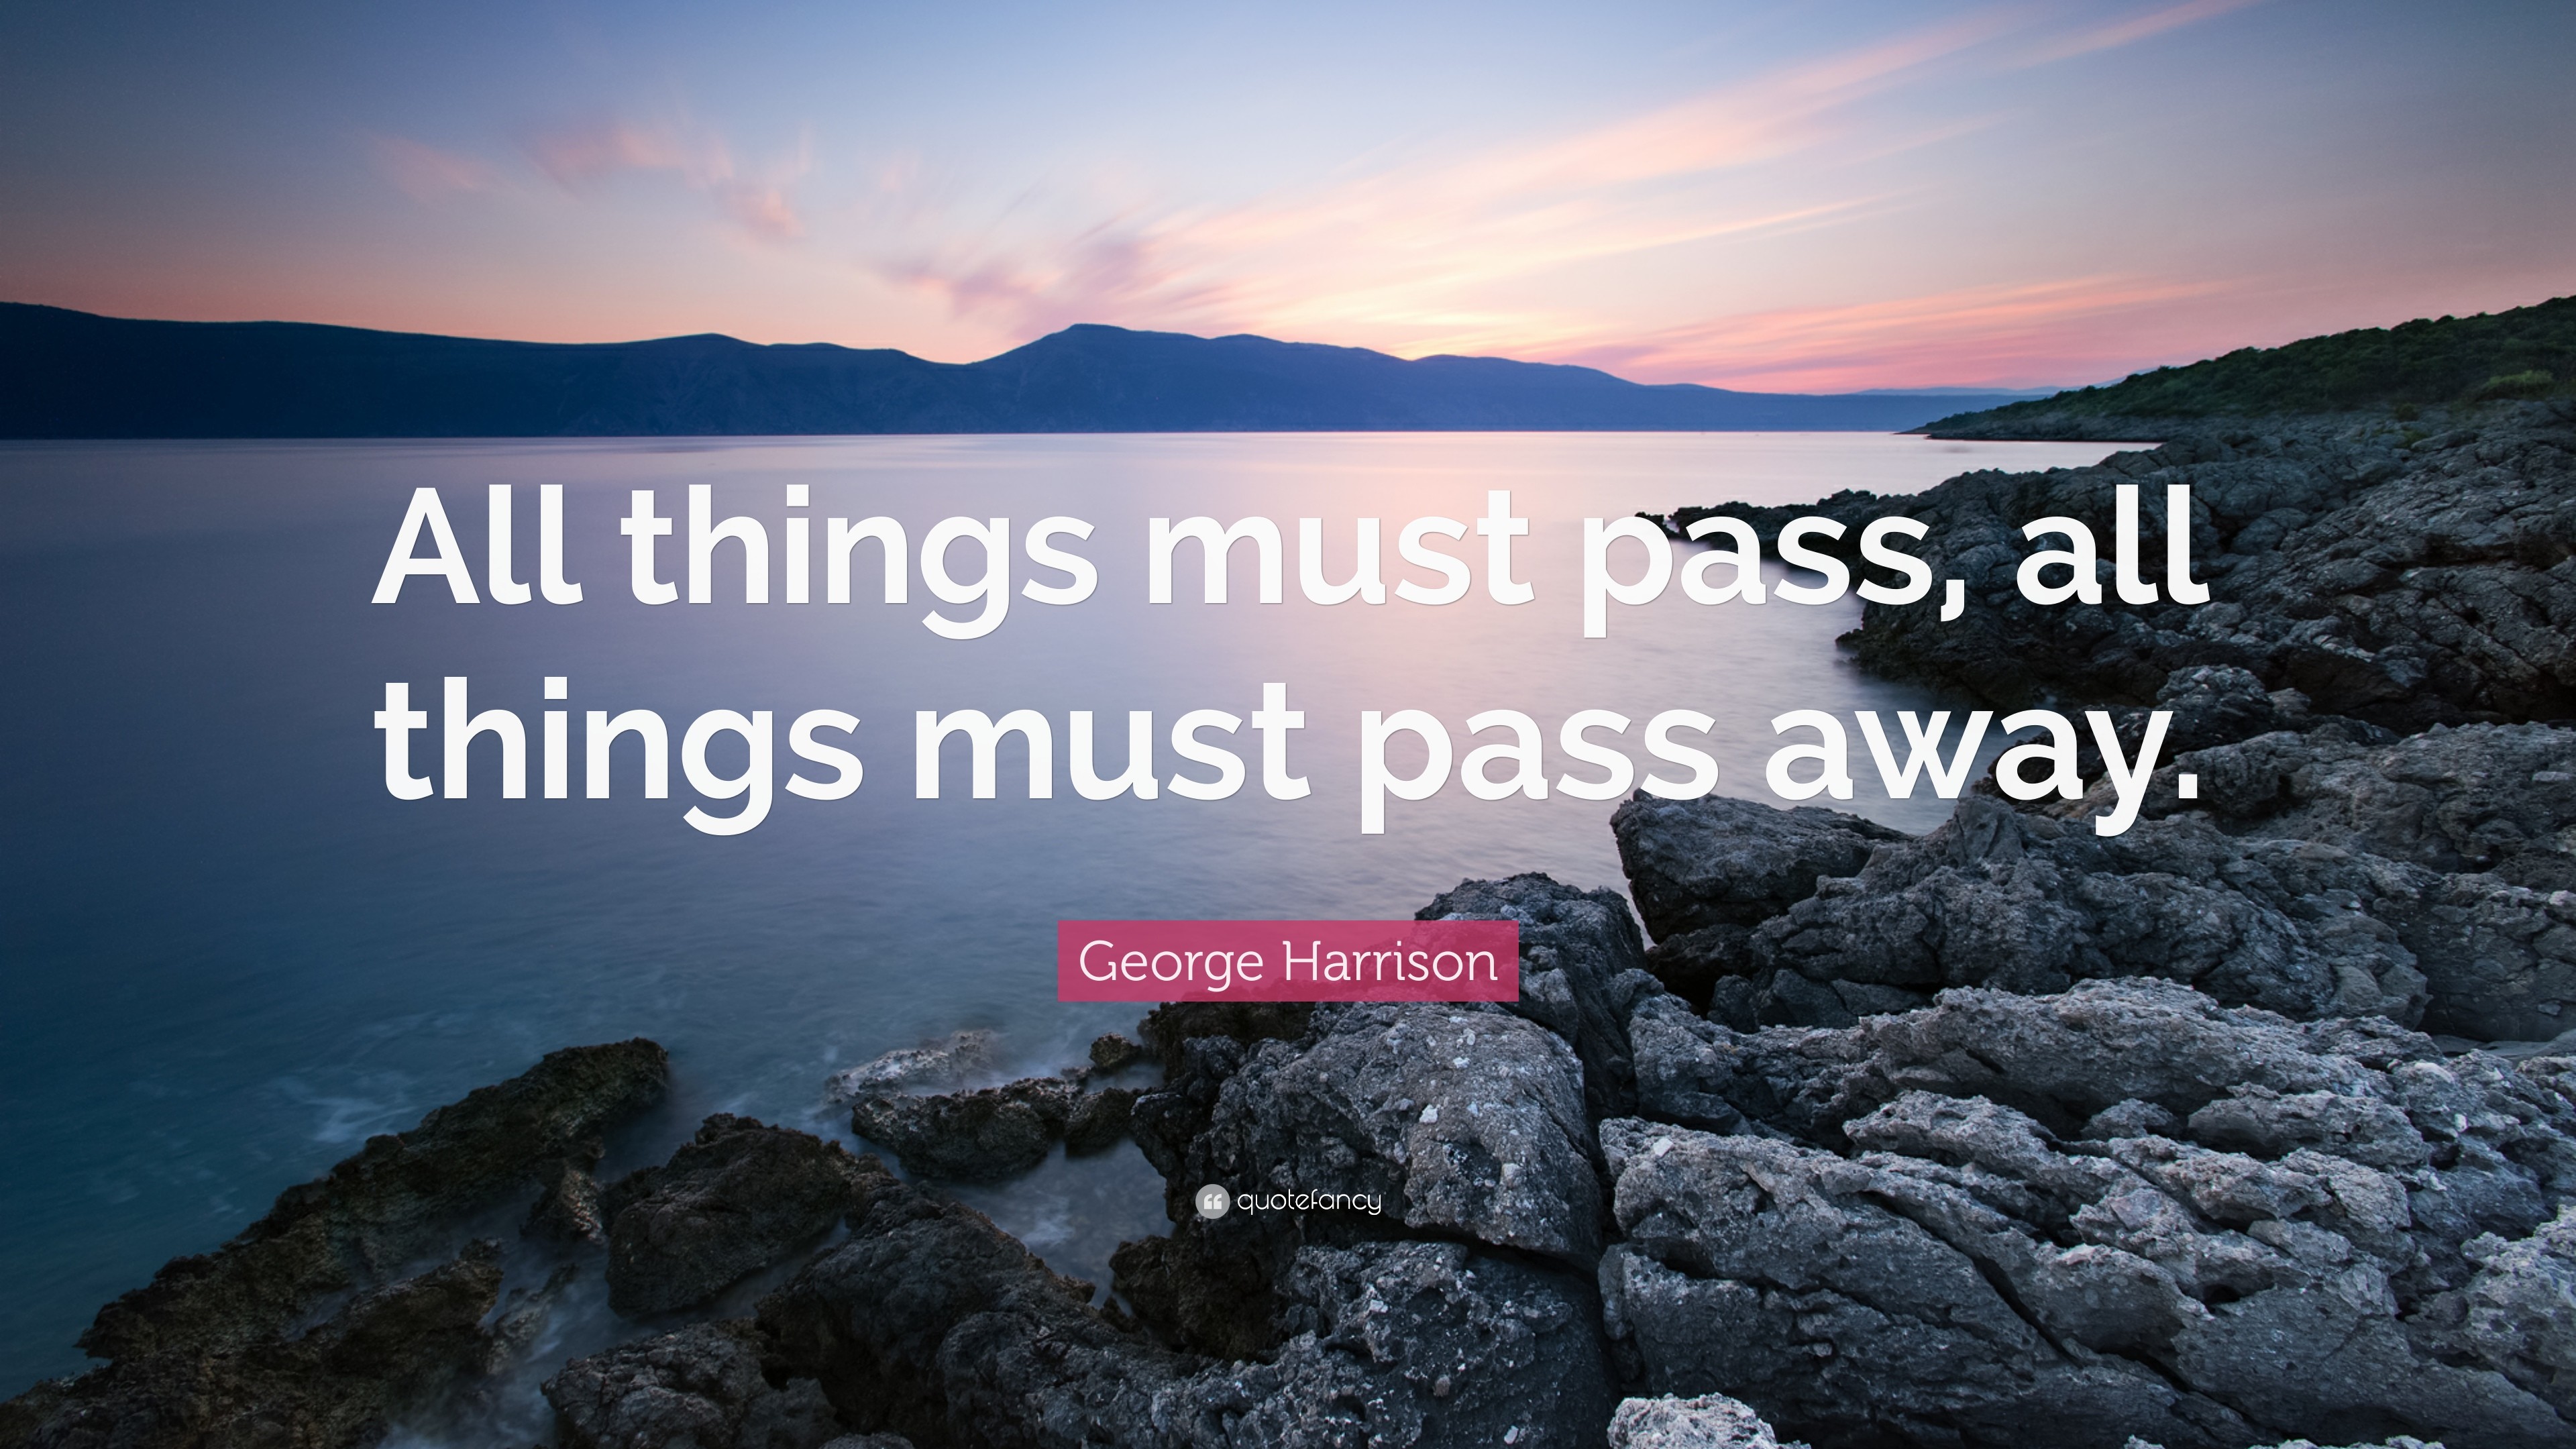 3840x2160 George Harrison Quote: “All things must pass, all things must pass away.